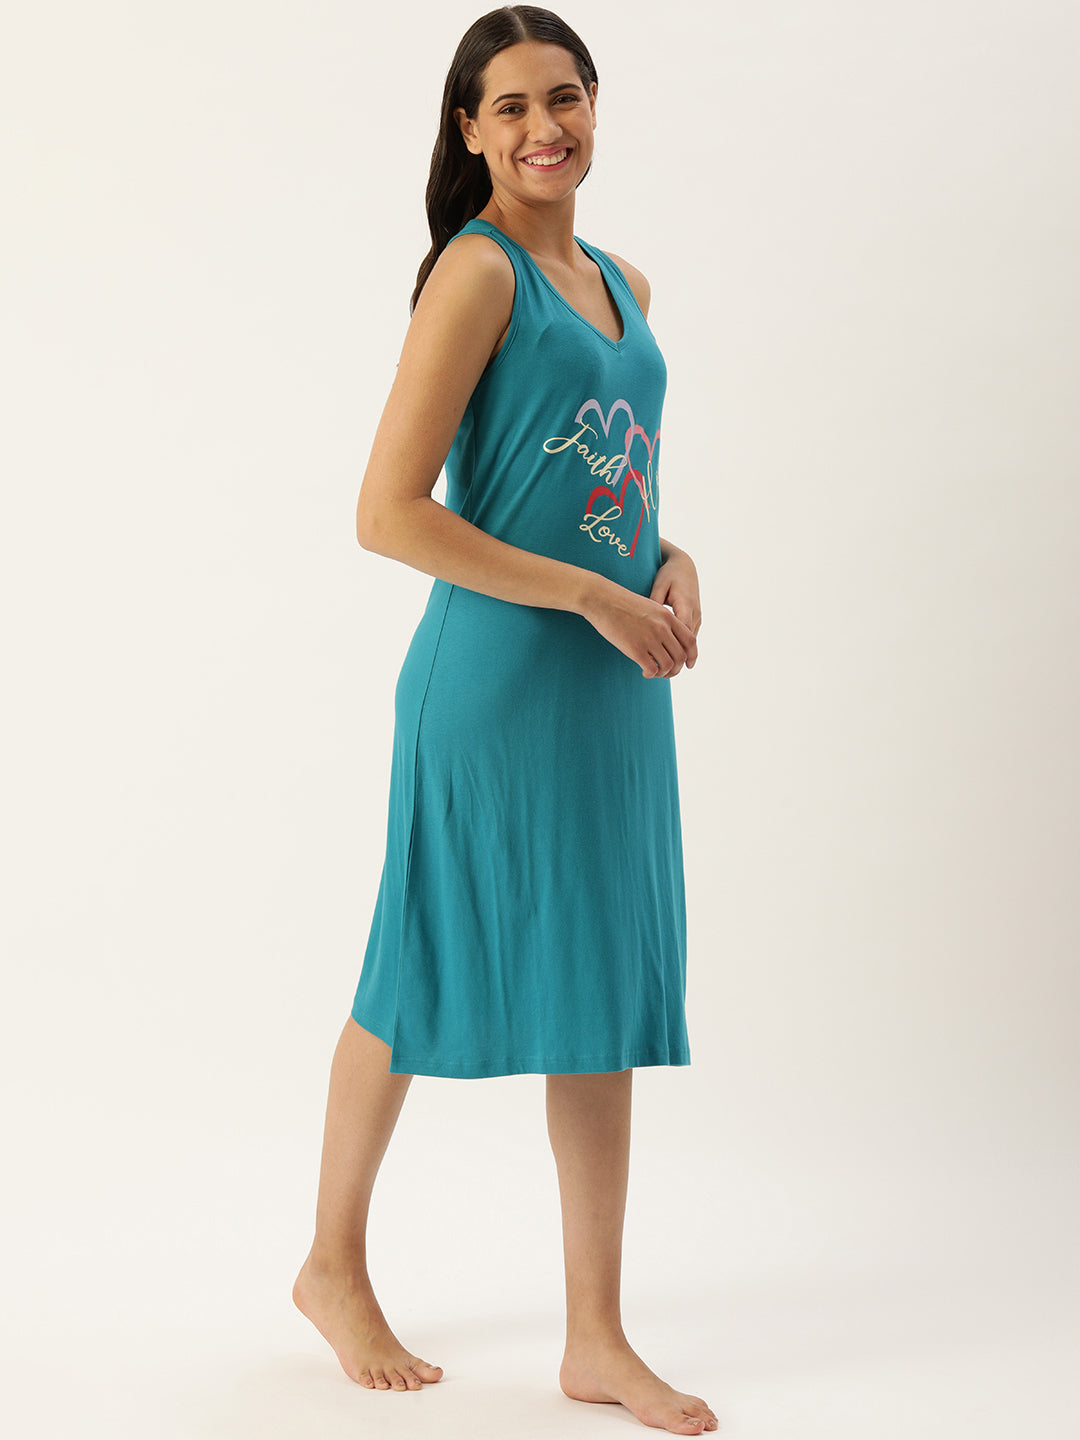 Charming Racerback Nightdress in Teal - Buttersoft Cotton